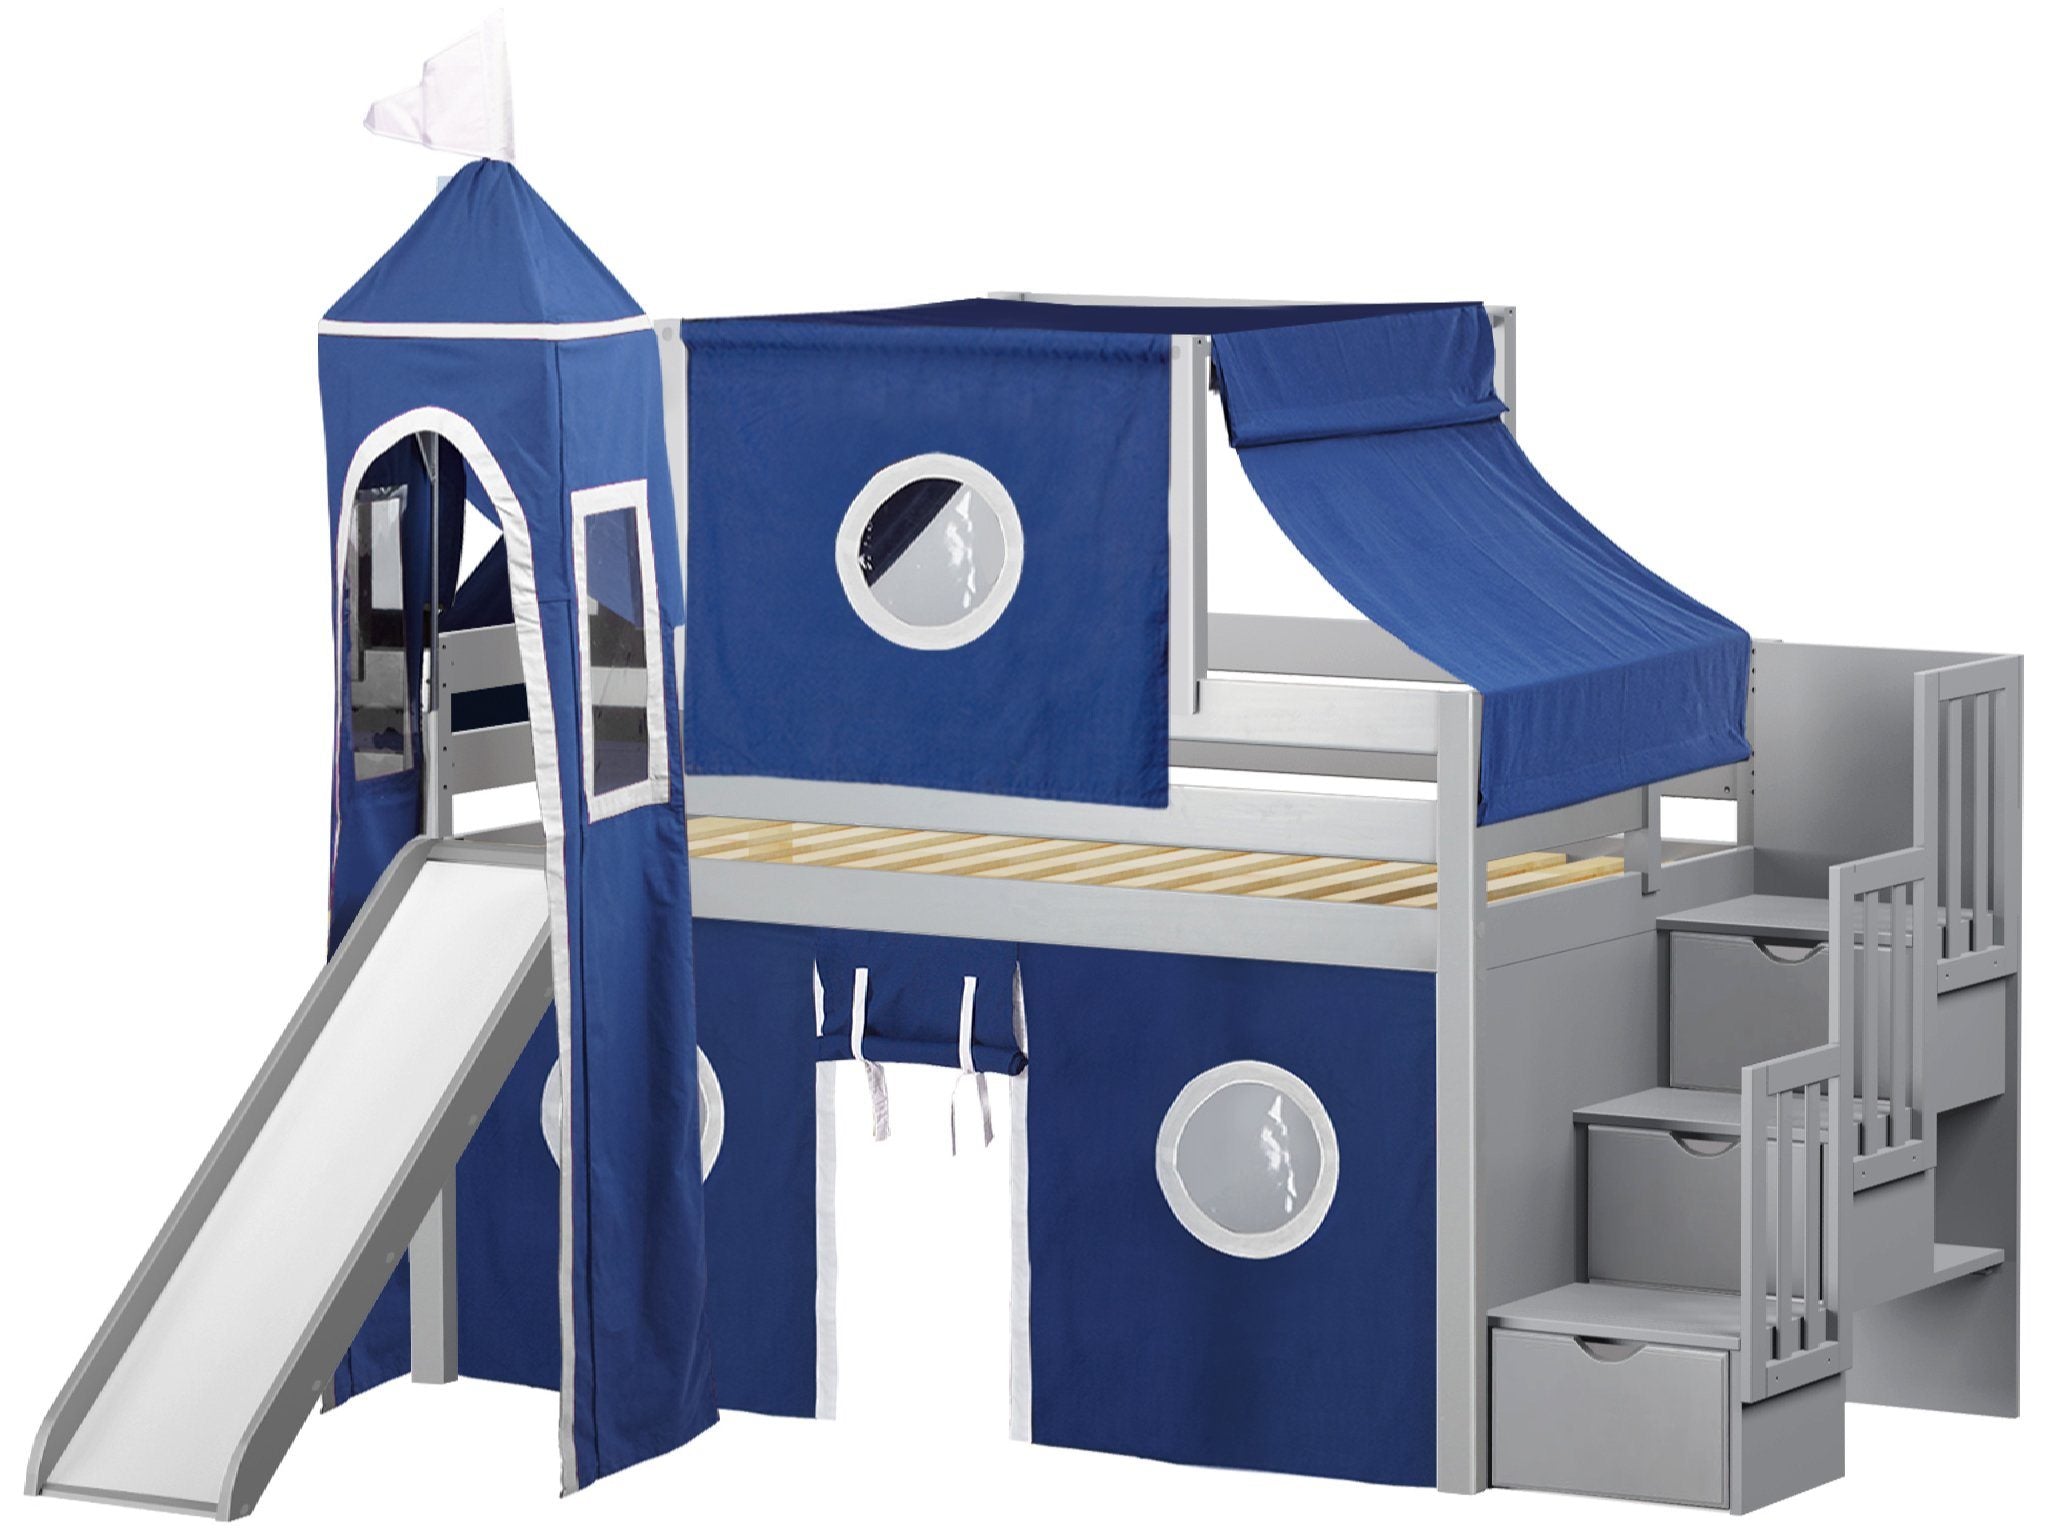 JACKPOT! Castle Low Loft Stairway Bed with Slide Blue & White Tent and Tower, Loft Bed, Twin, Gray